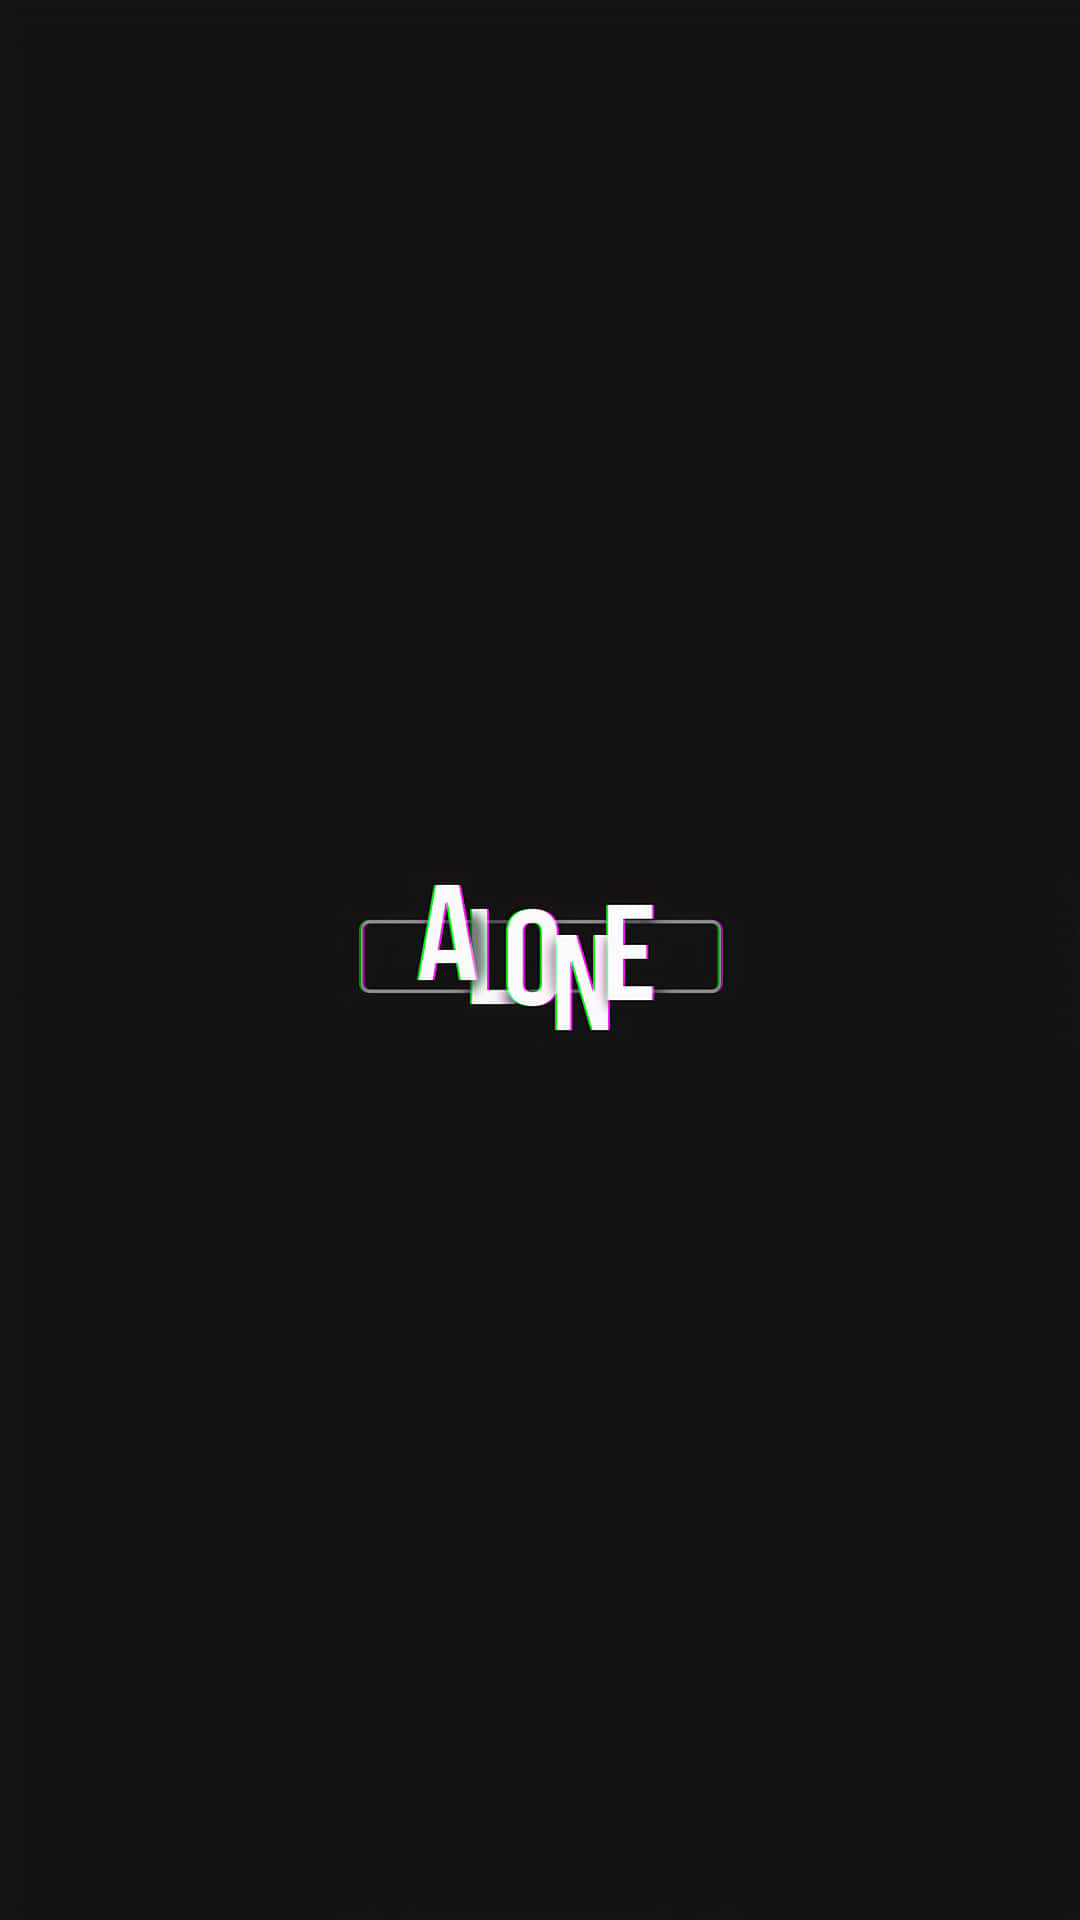 A Black Background With The Word Alone On It